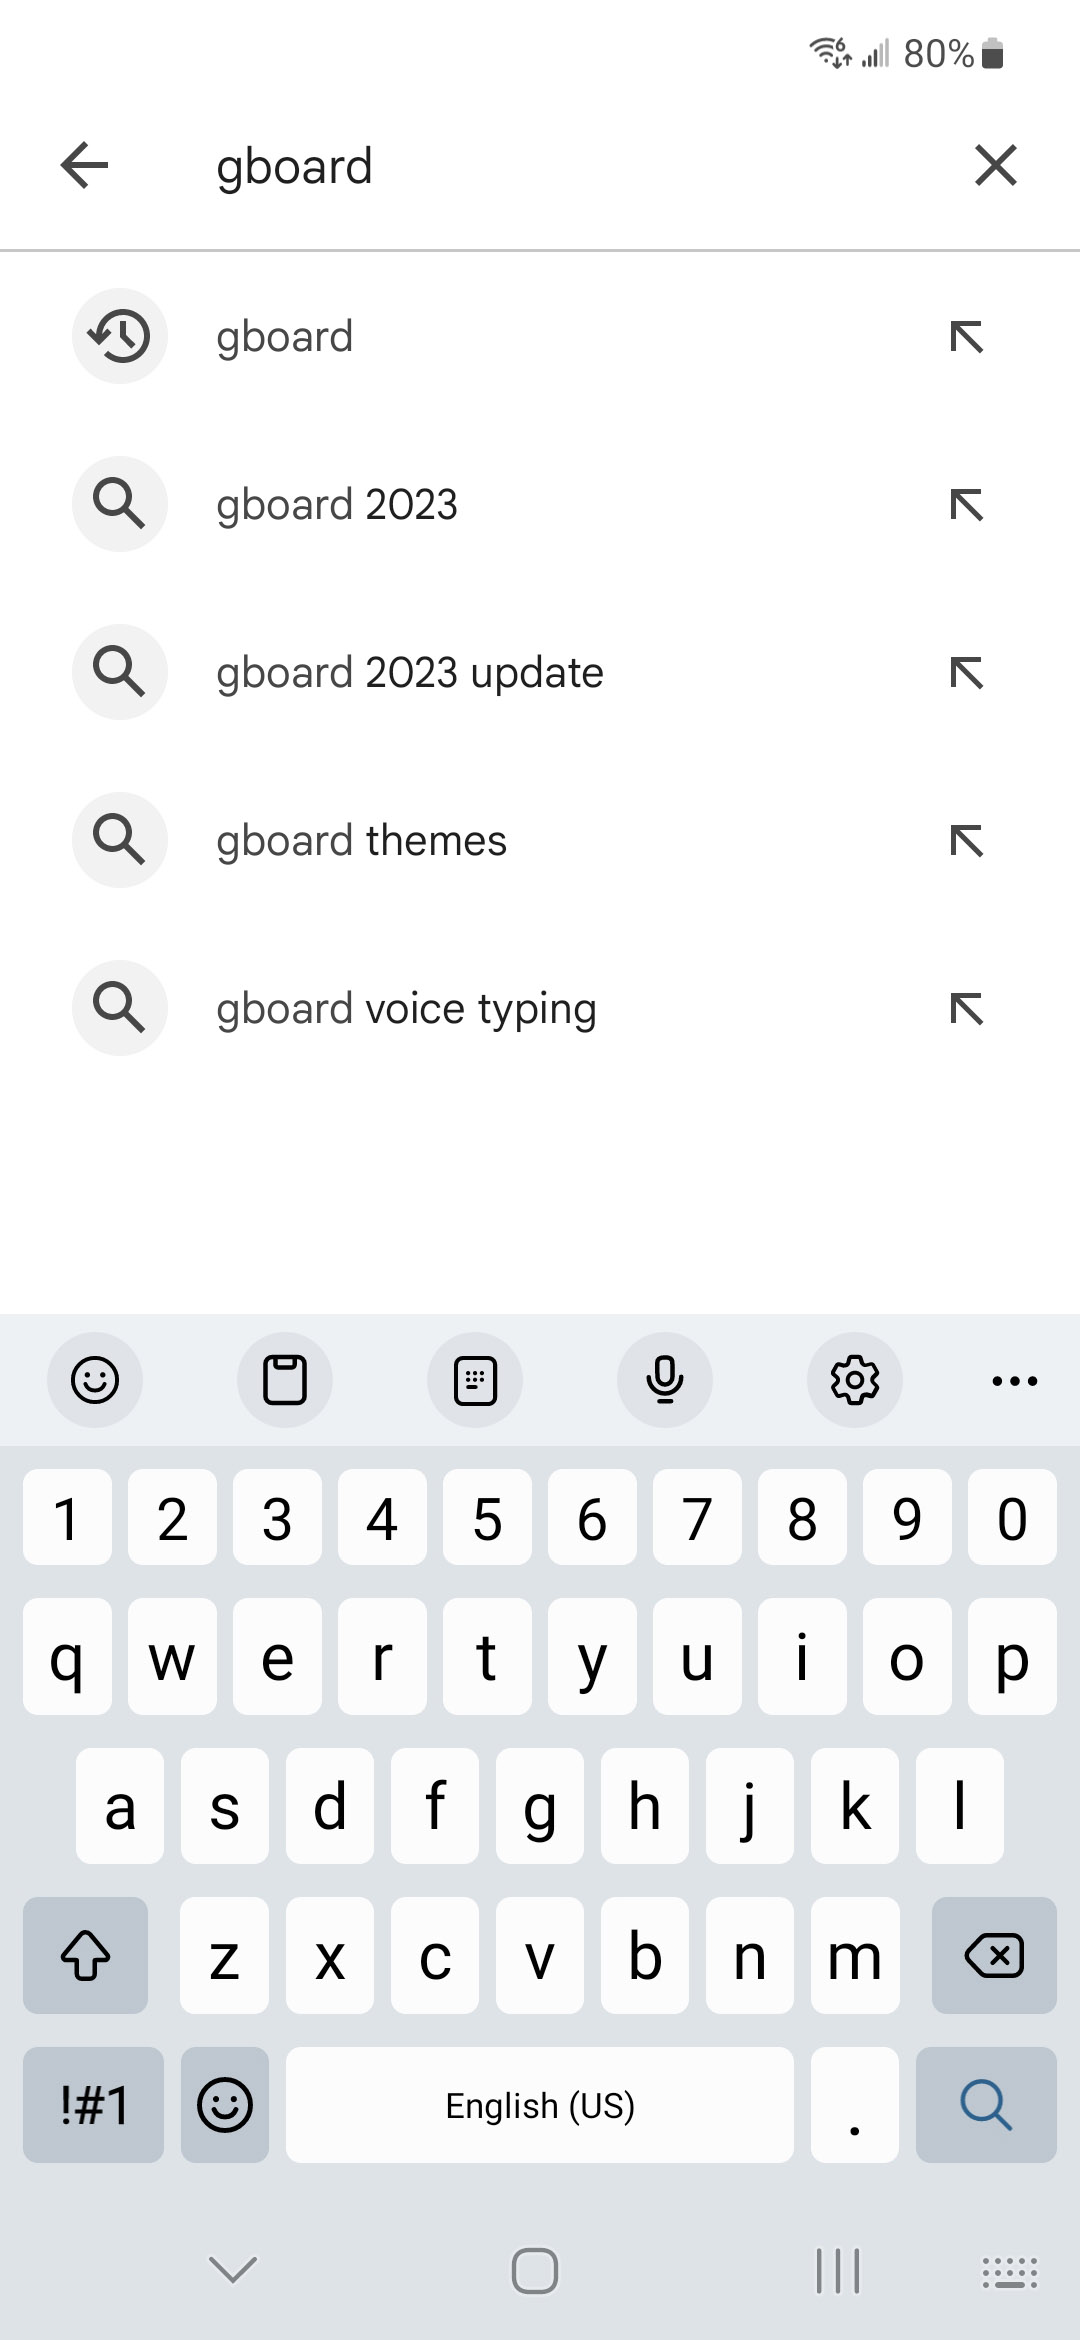 searching for gboard on google play store